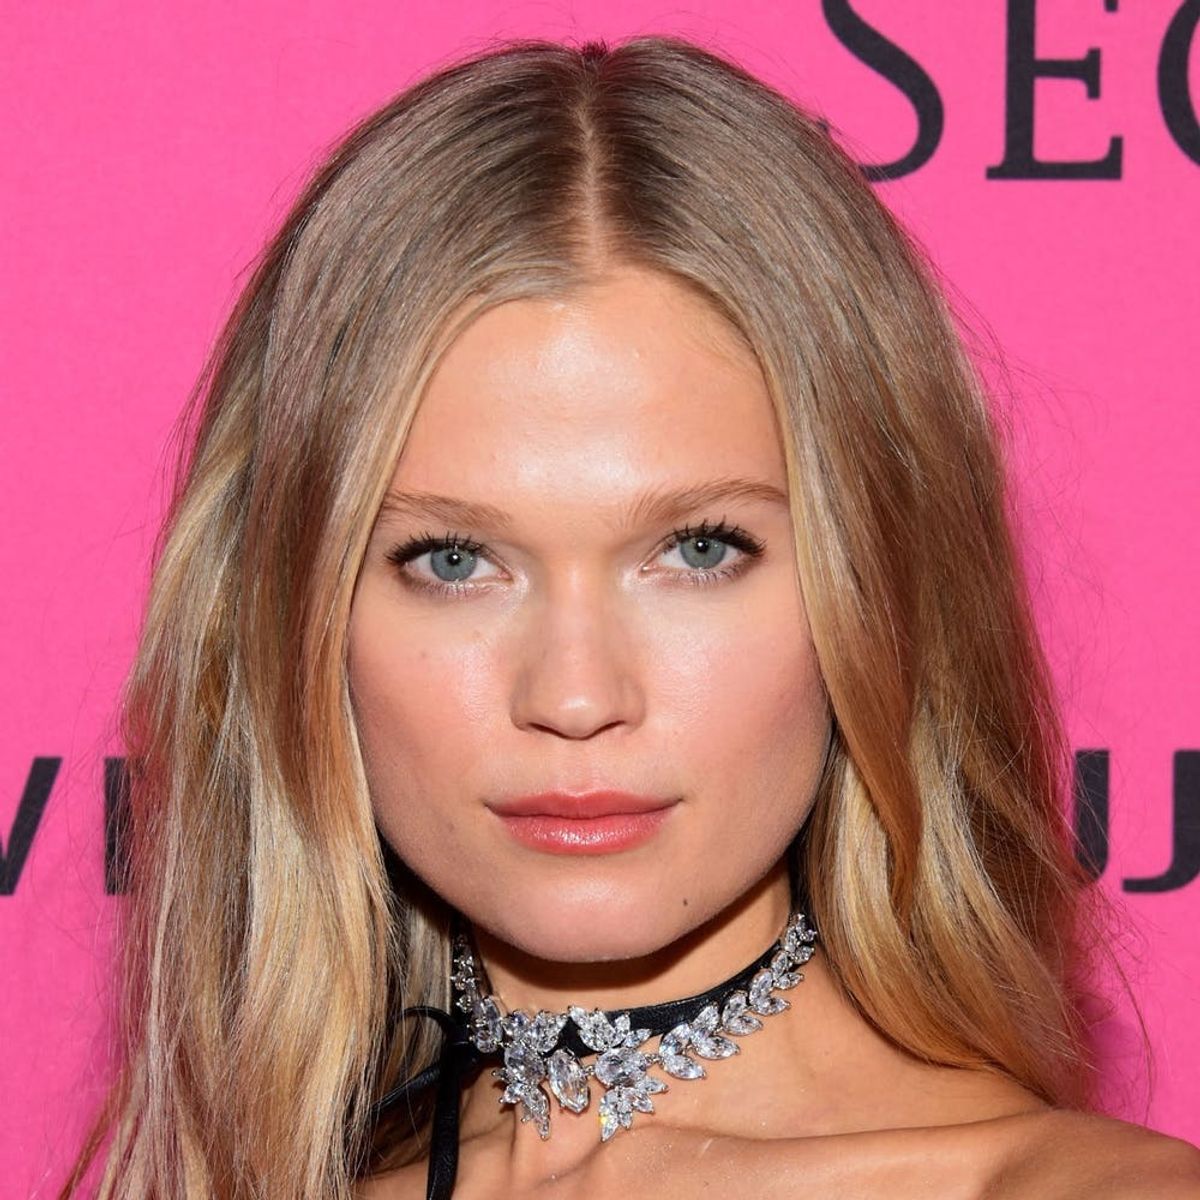 You Need to See This Victoria’s Secret Model’s 2-in-1 Wedding Dress